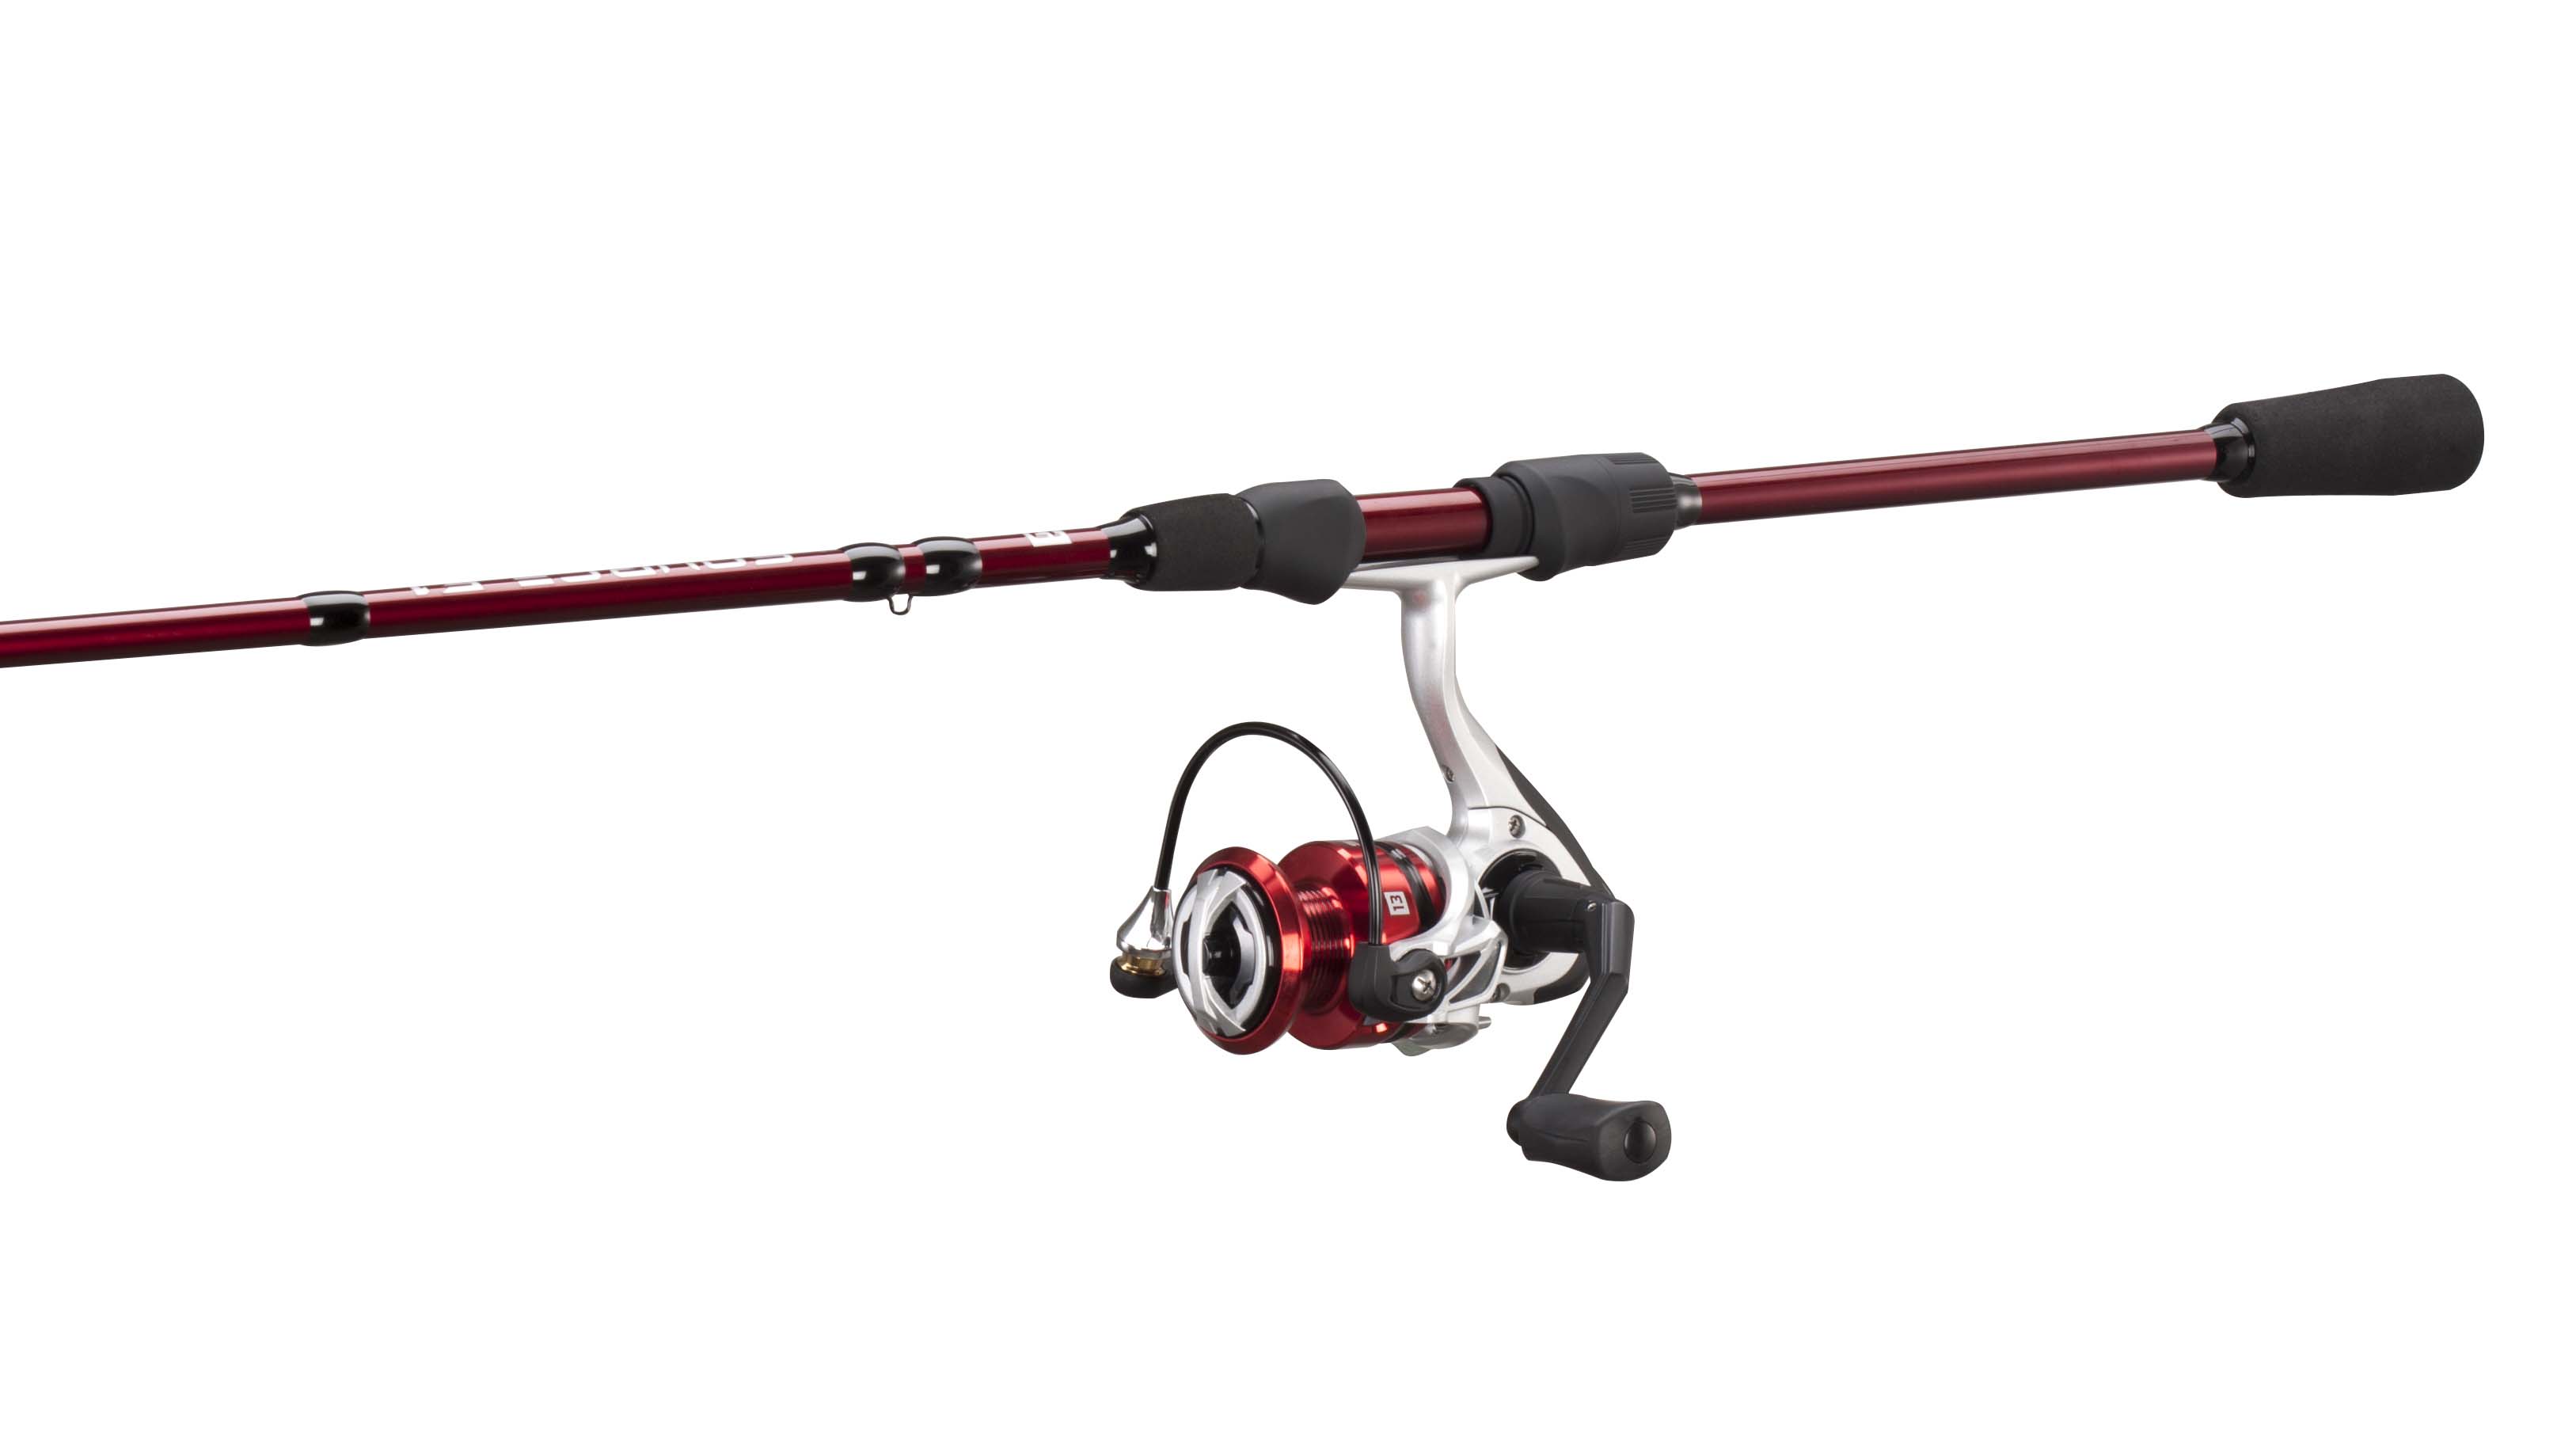 13 Fishing Source F1 Spinning Combo 3000 Size Reel, Fast Action, Fresh